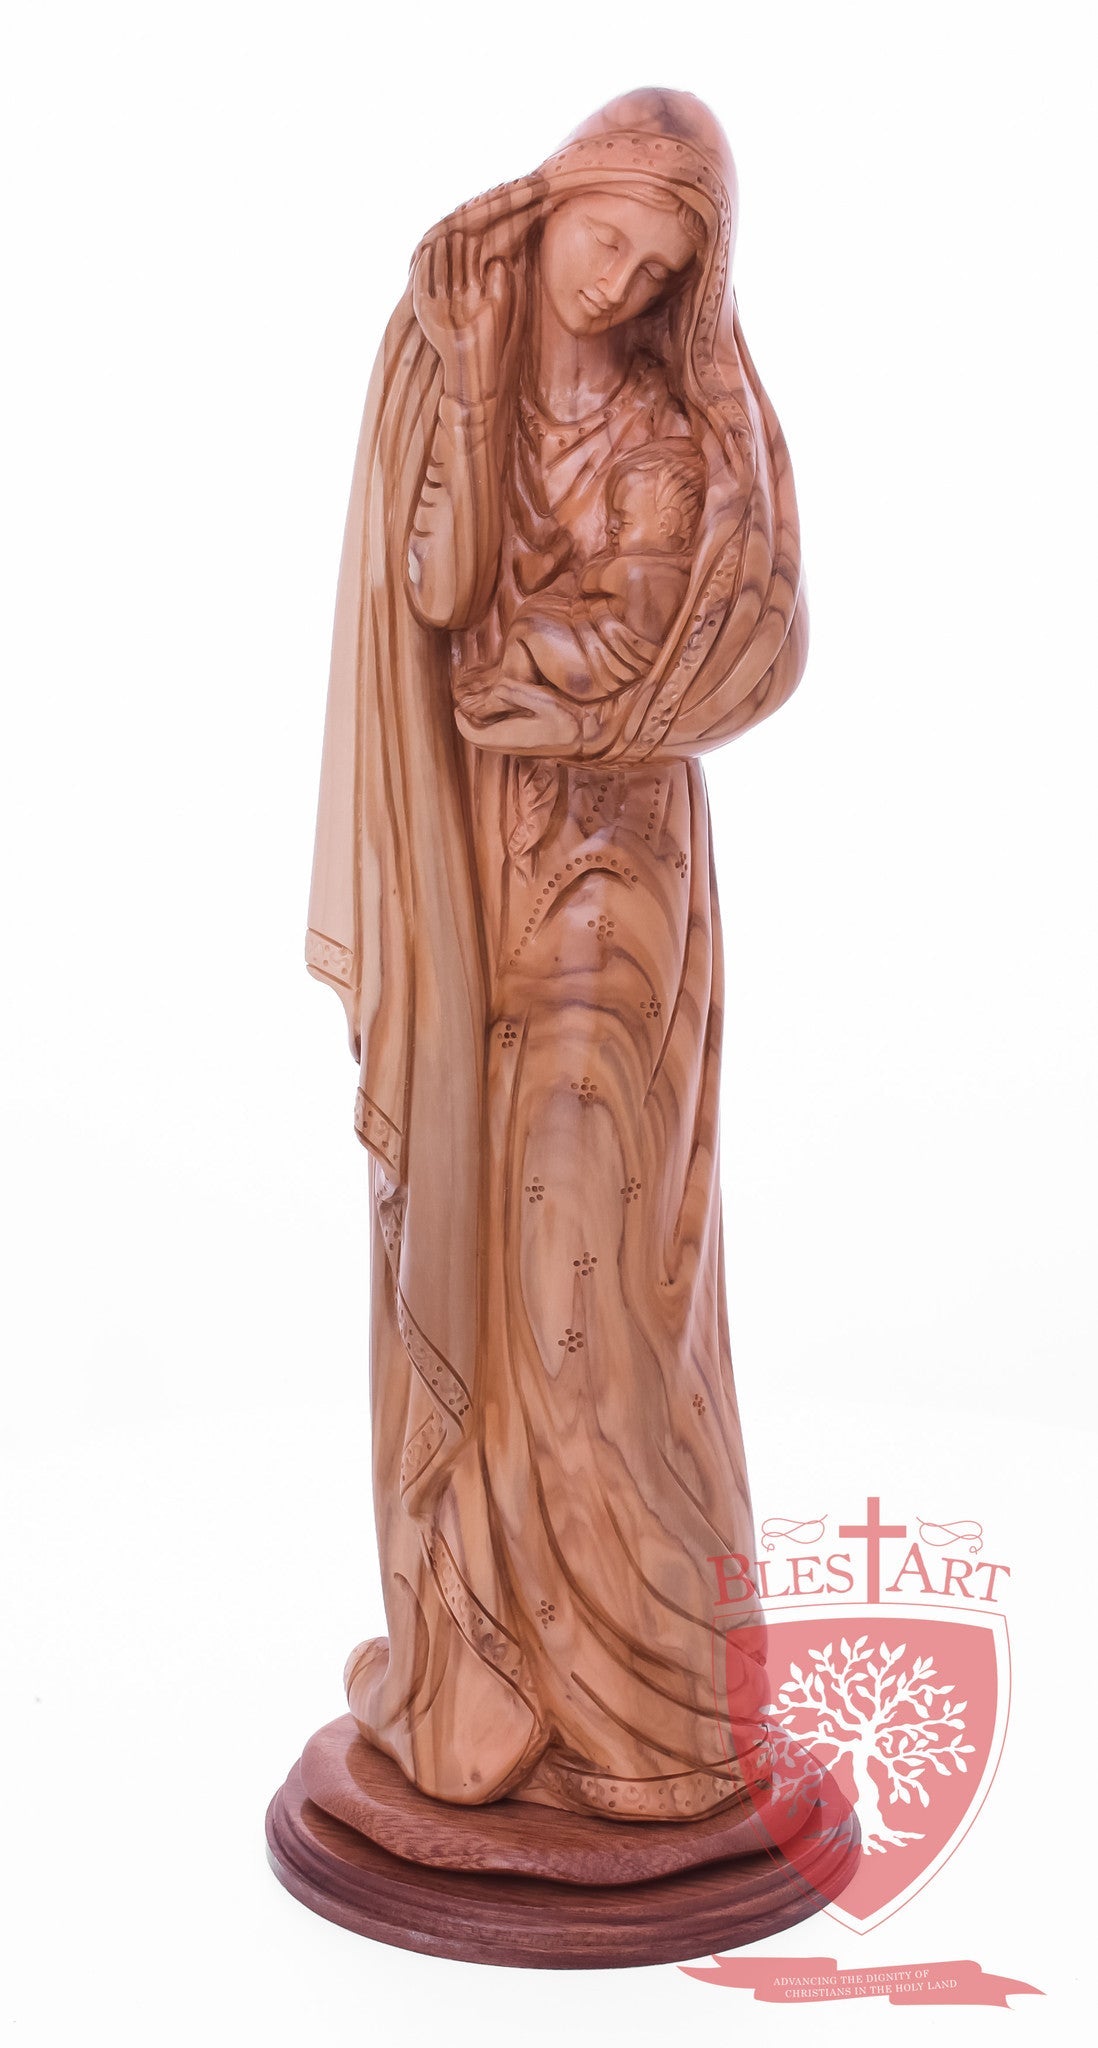 Mary with baby Jesus, Two Sizes available 19.5" and 12" Height